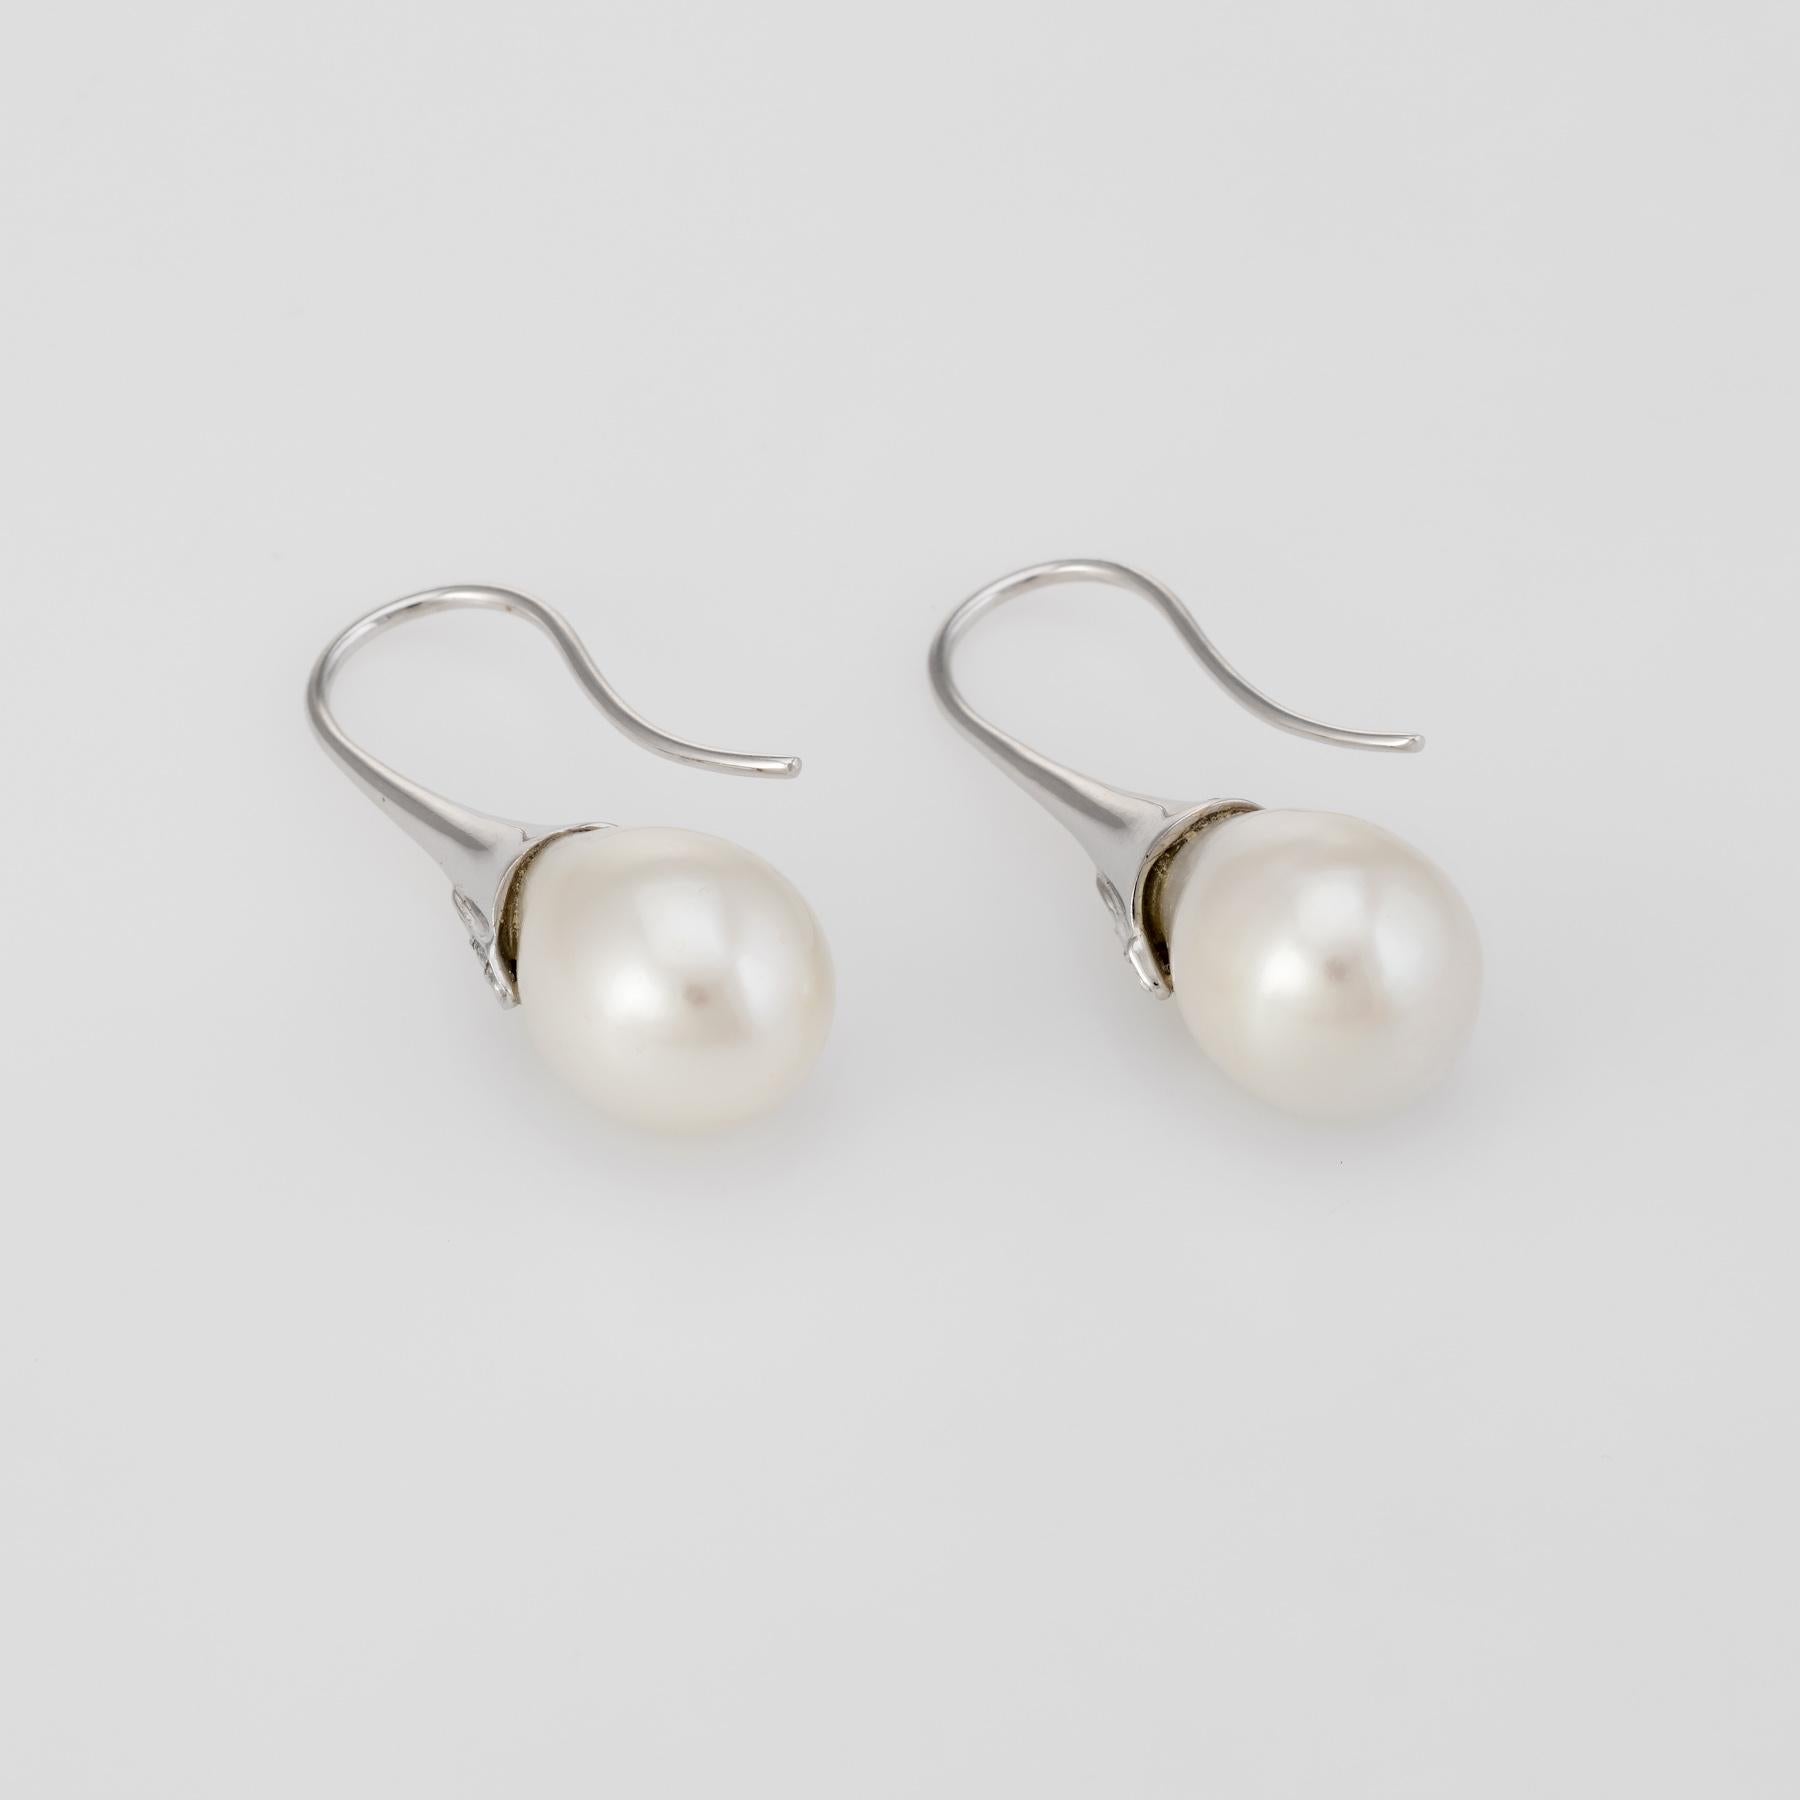 Elegant pair of freshwater pearl & diamond earrings, crafted in 18k white gold. 

Freshwater pearls each measure 9.5mm, accented with an estimated 0.02 carats of diamonds (estimated at I color and I1 clarity).

The earrings feature hook